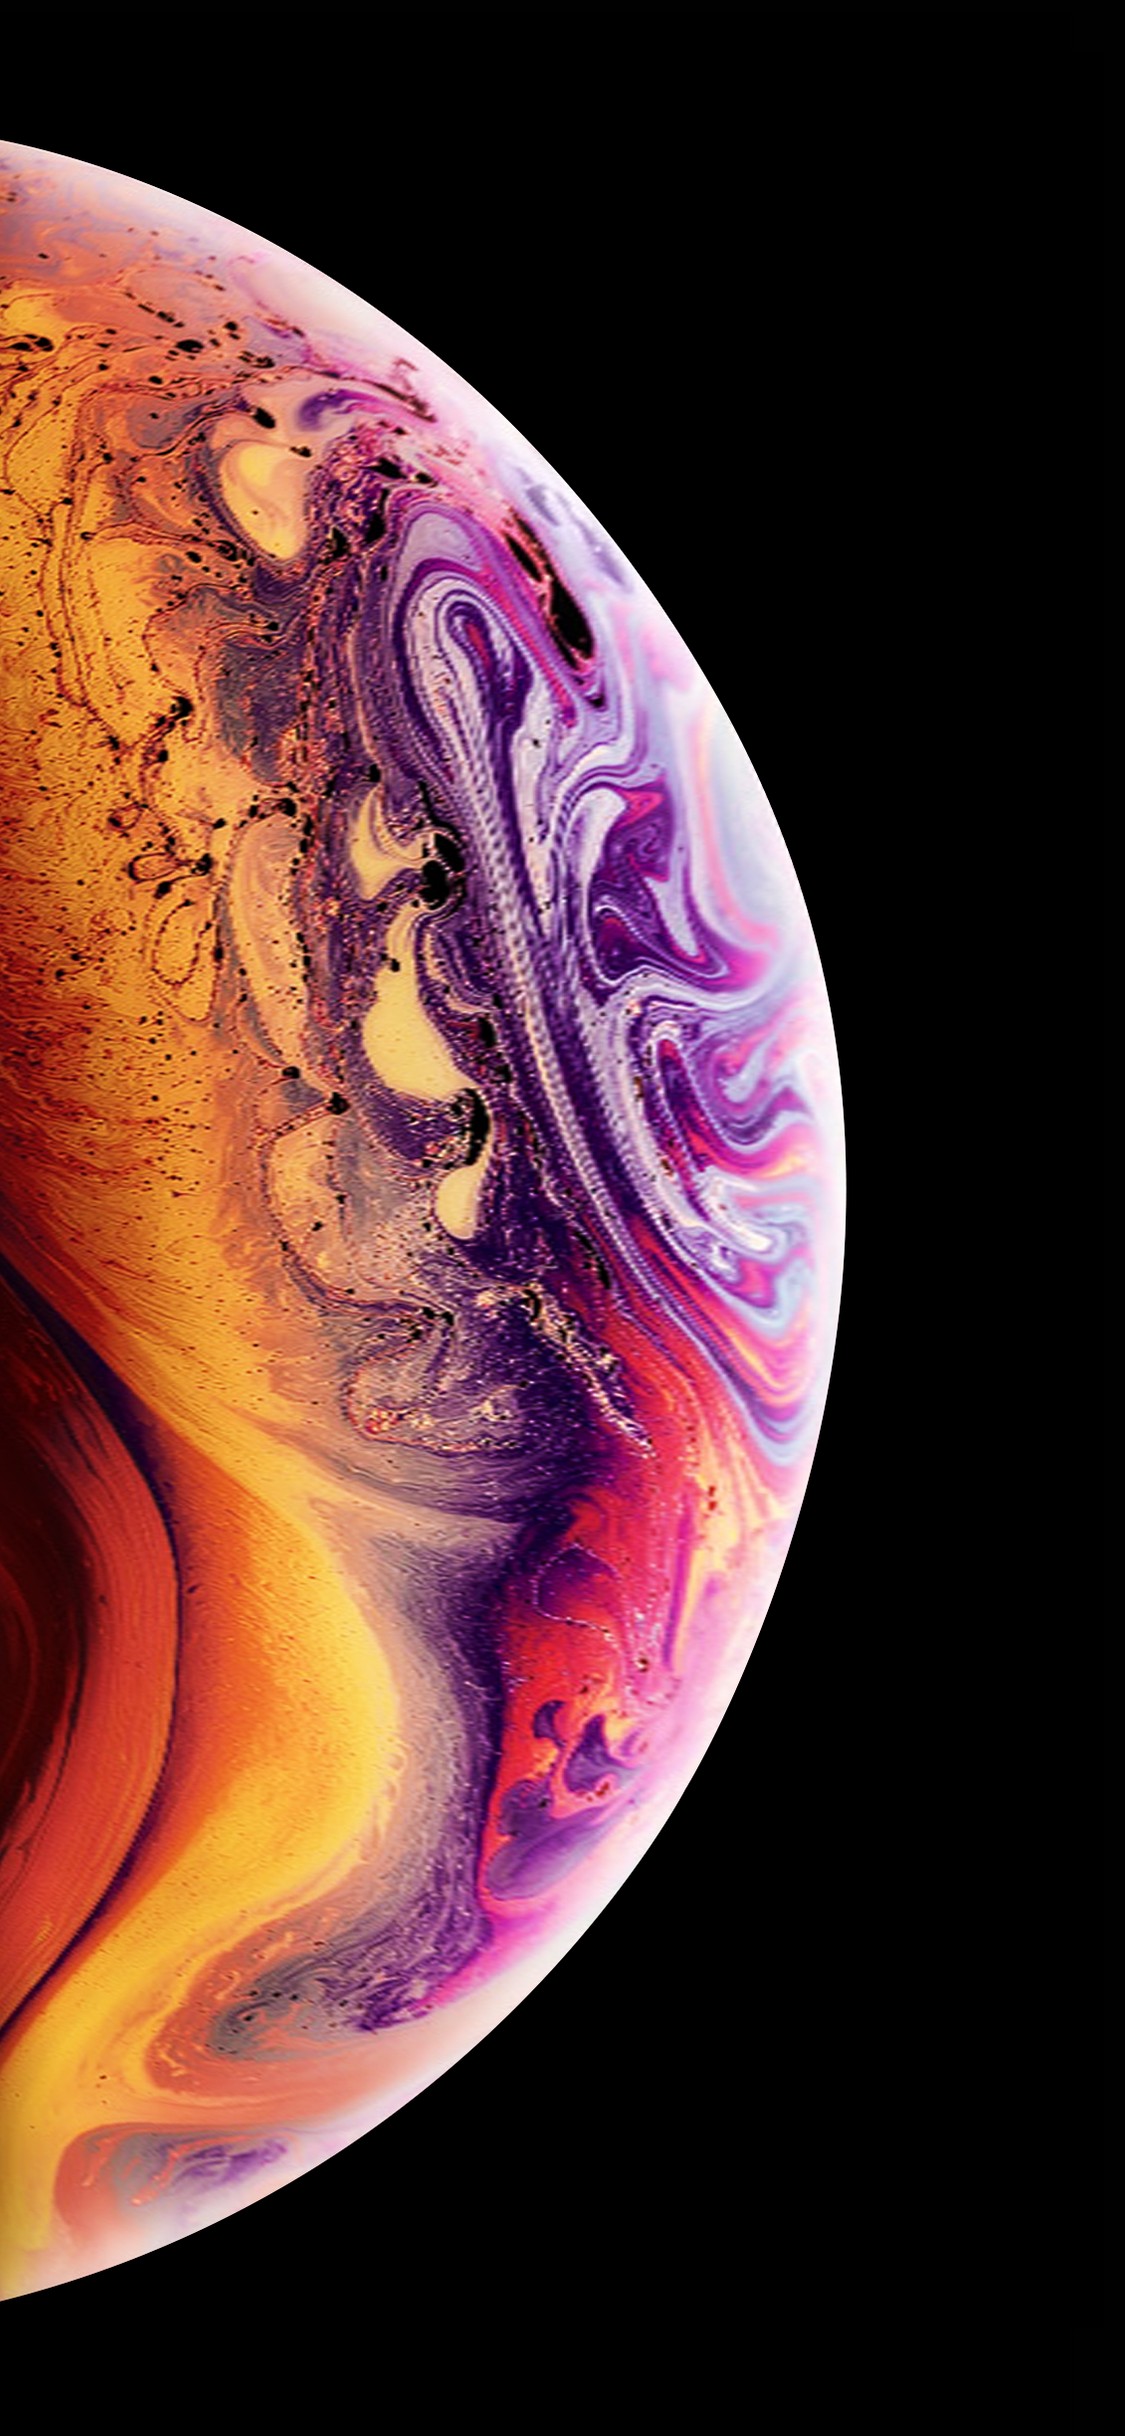 iPhone XS Screensaver with high-resolution 1125x2436 pixel. You can set as wallpaper for Apple iPhone X, XS Max, XR, 8, 7, 6, SE, iPad. Enjoy and share your favorite HD wallpapers and background images